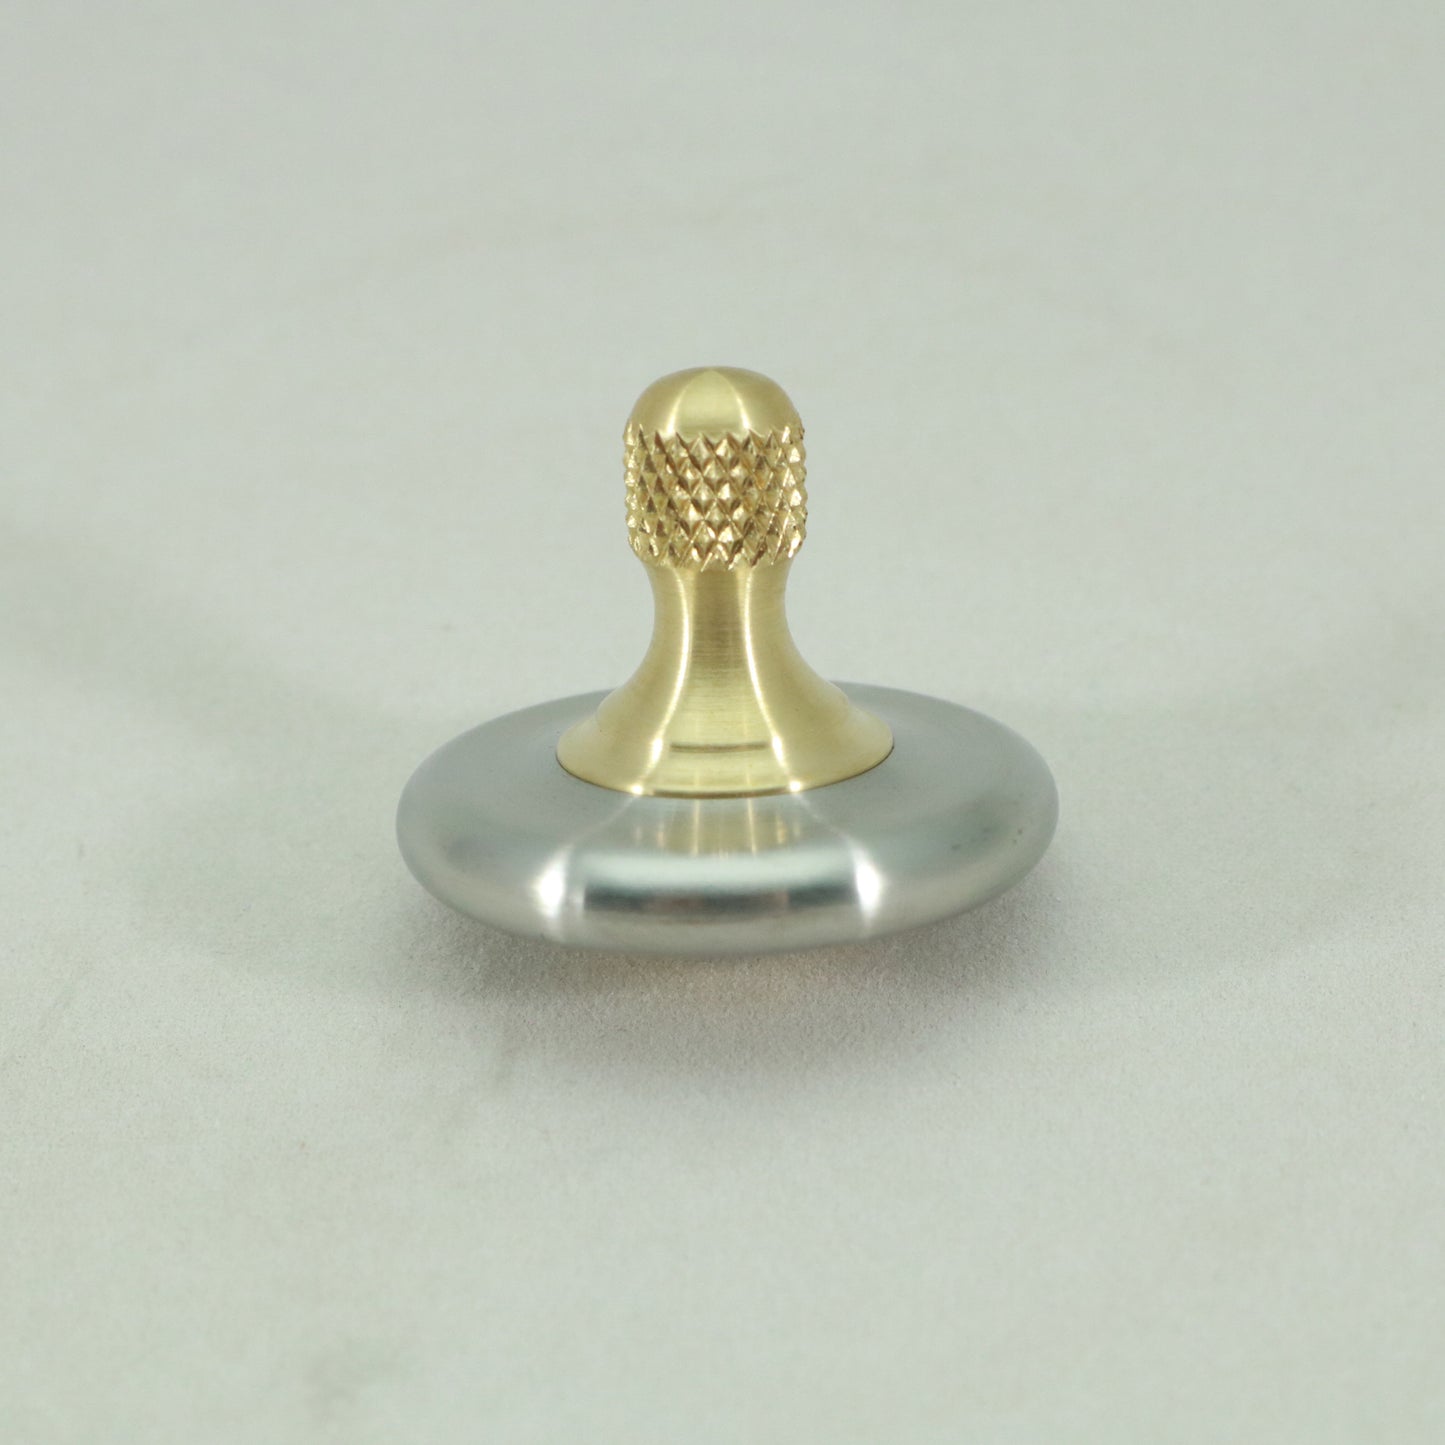 M3 - Brushed Stainless Steel and Brass Spinning Top